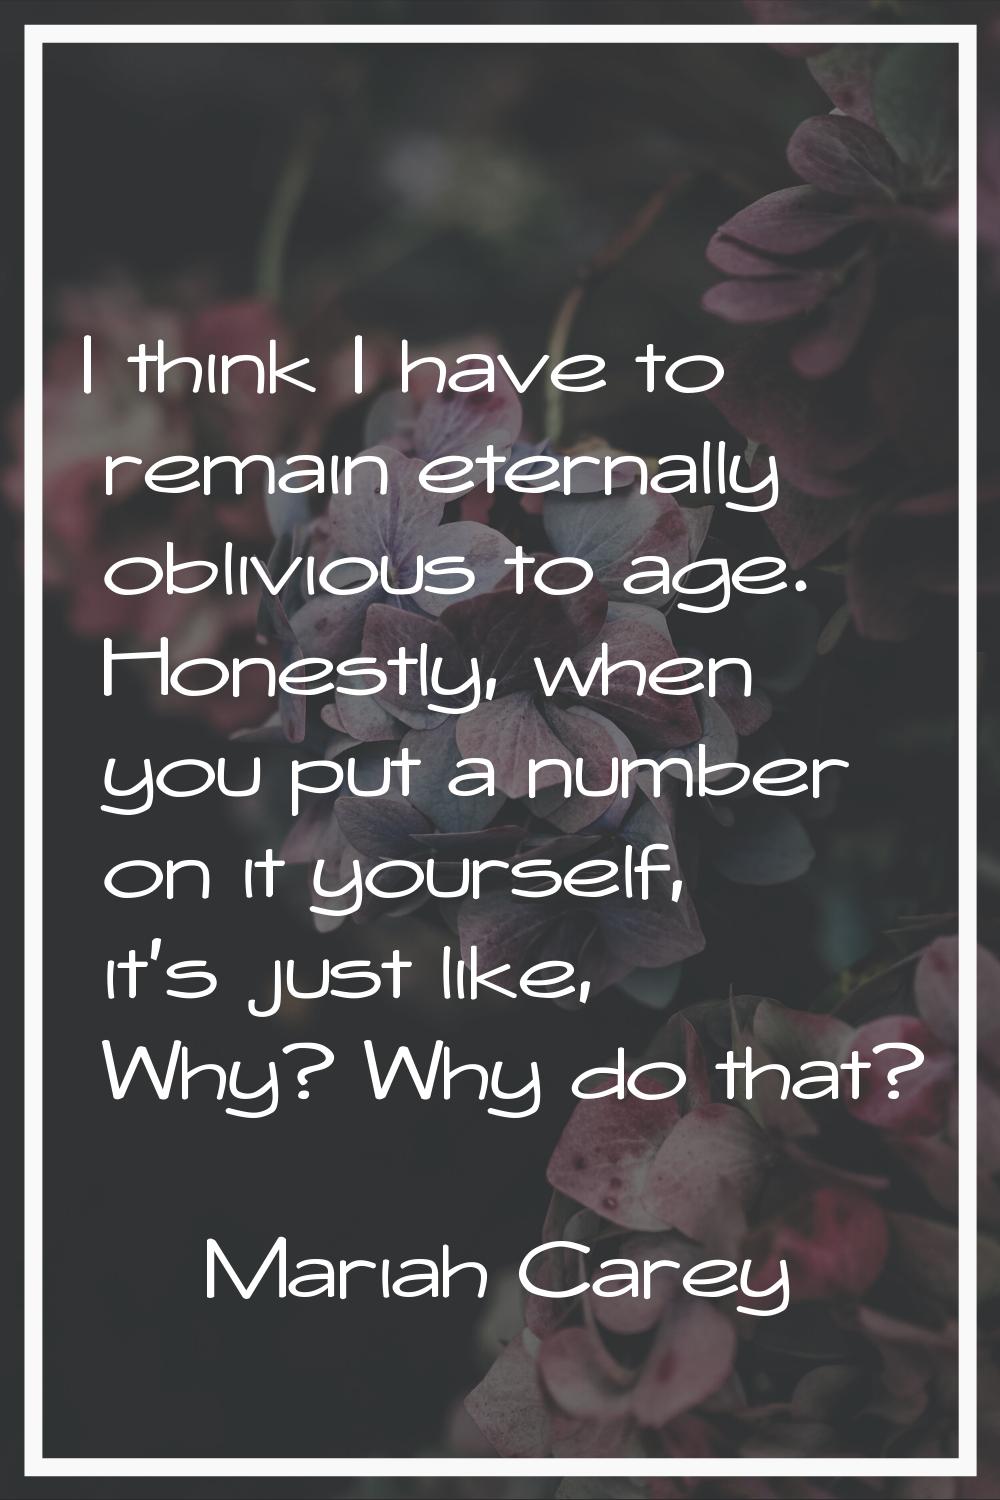 I think I have to remain eternally oblivious to age. Honestly, when you put a number on it yourself